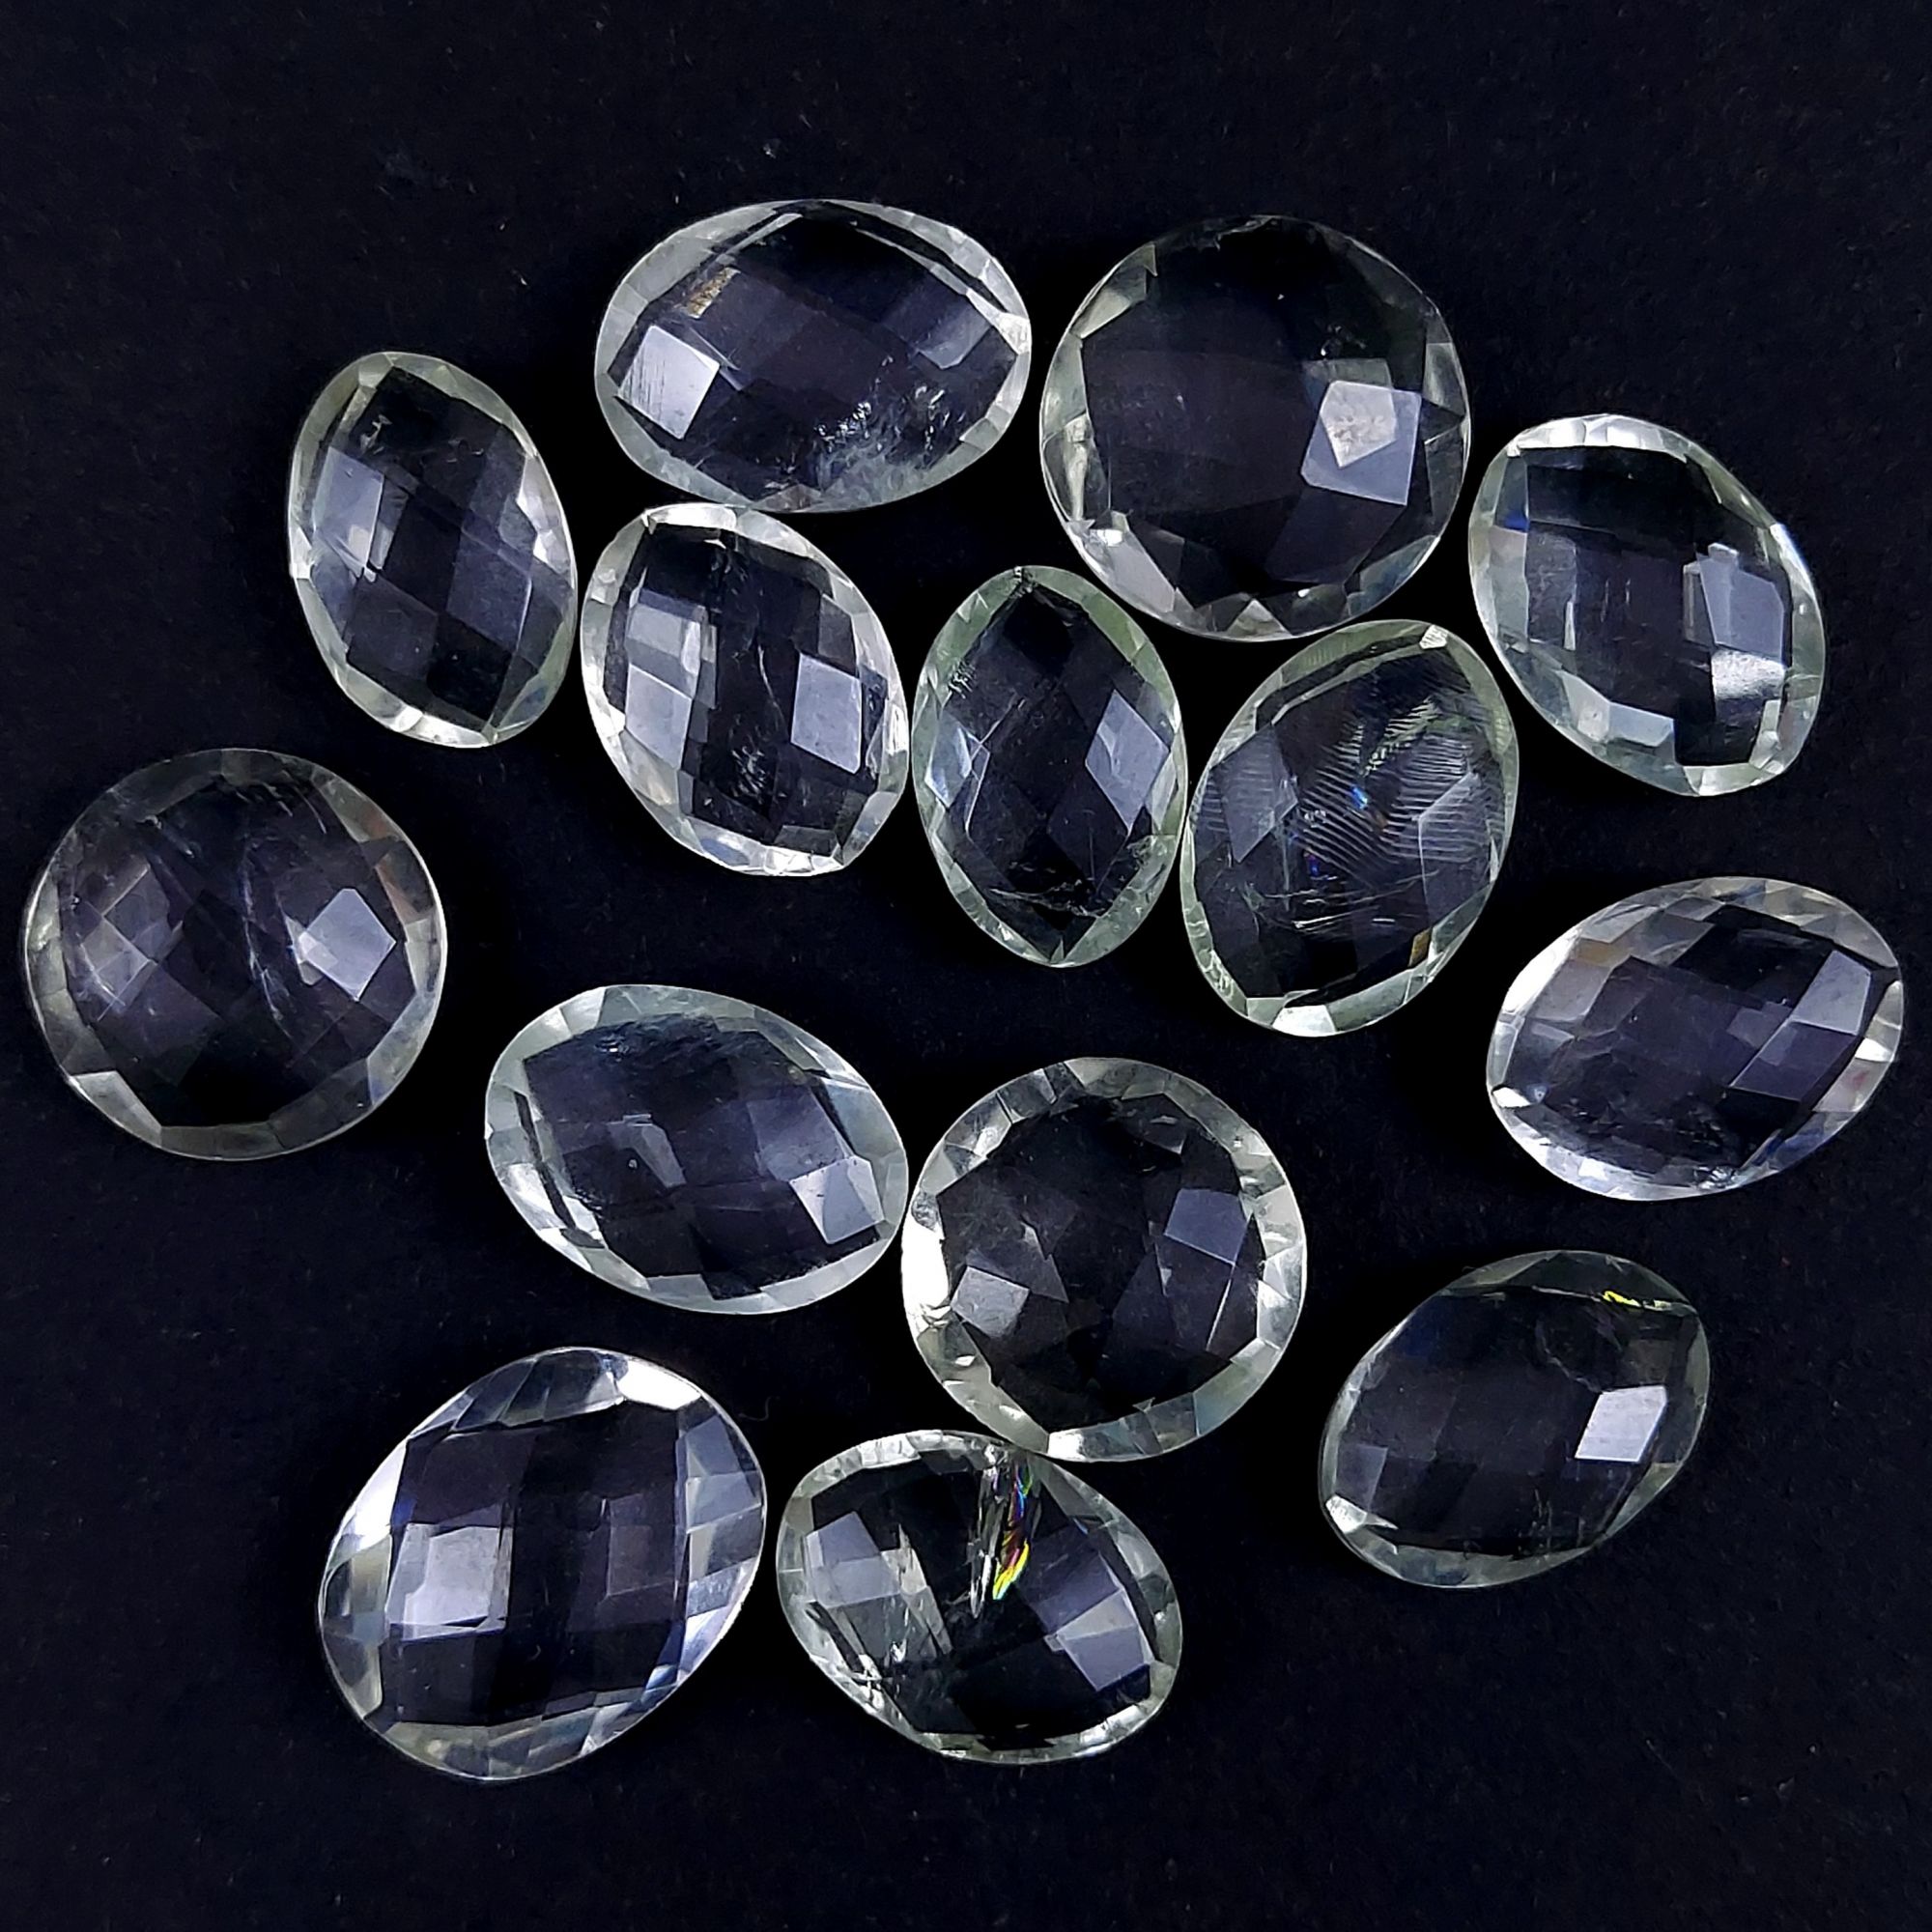 14Pcs 71Cts Natural Crystal Quartz Faceted Cabochon Gemstone Clear Quartz Crystal Briolite Loose Gemstone for jewelry Making 14x14 12x10mm#G-1646